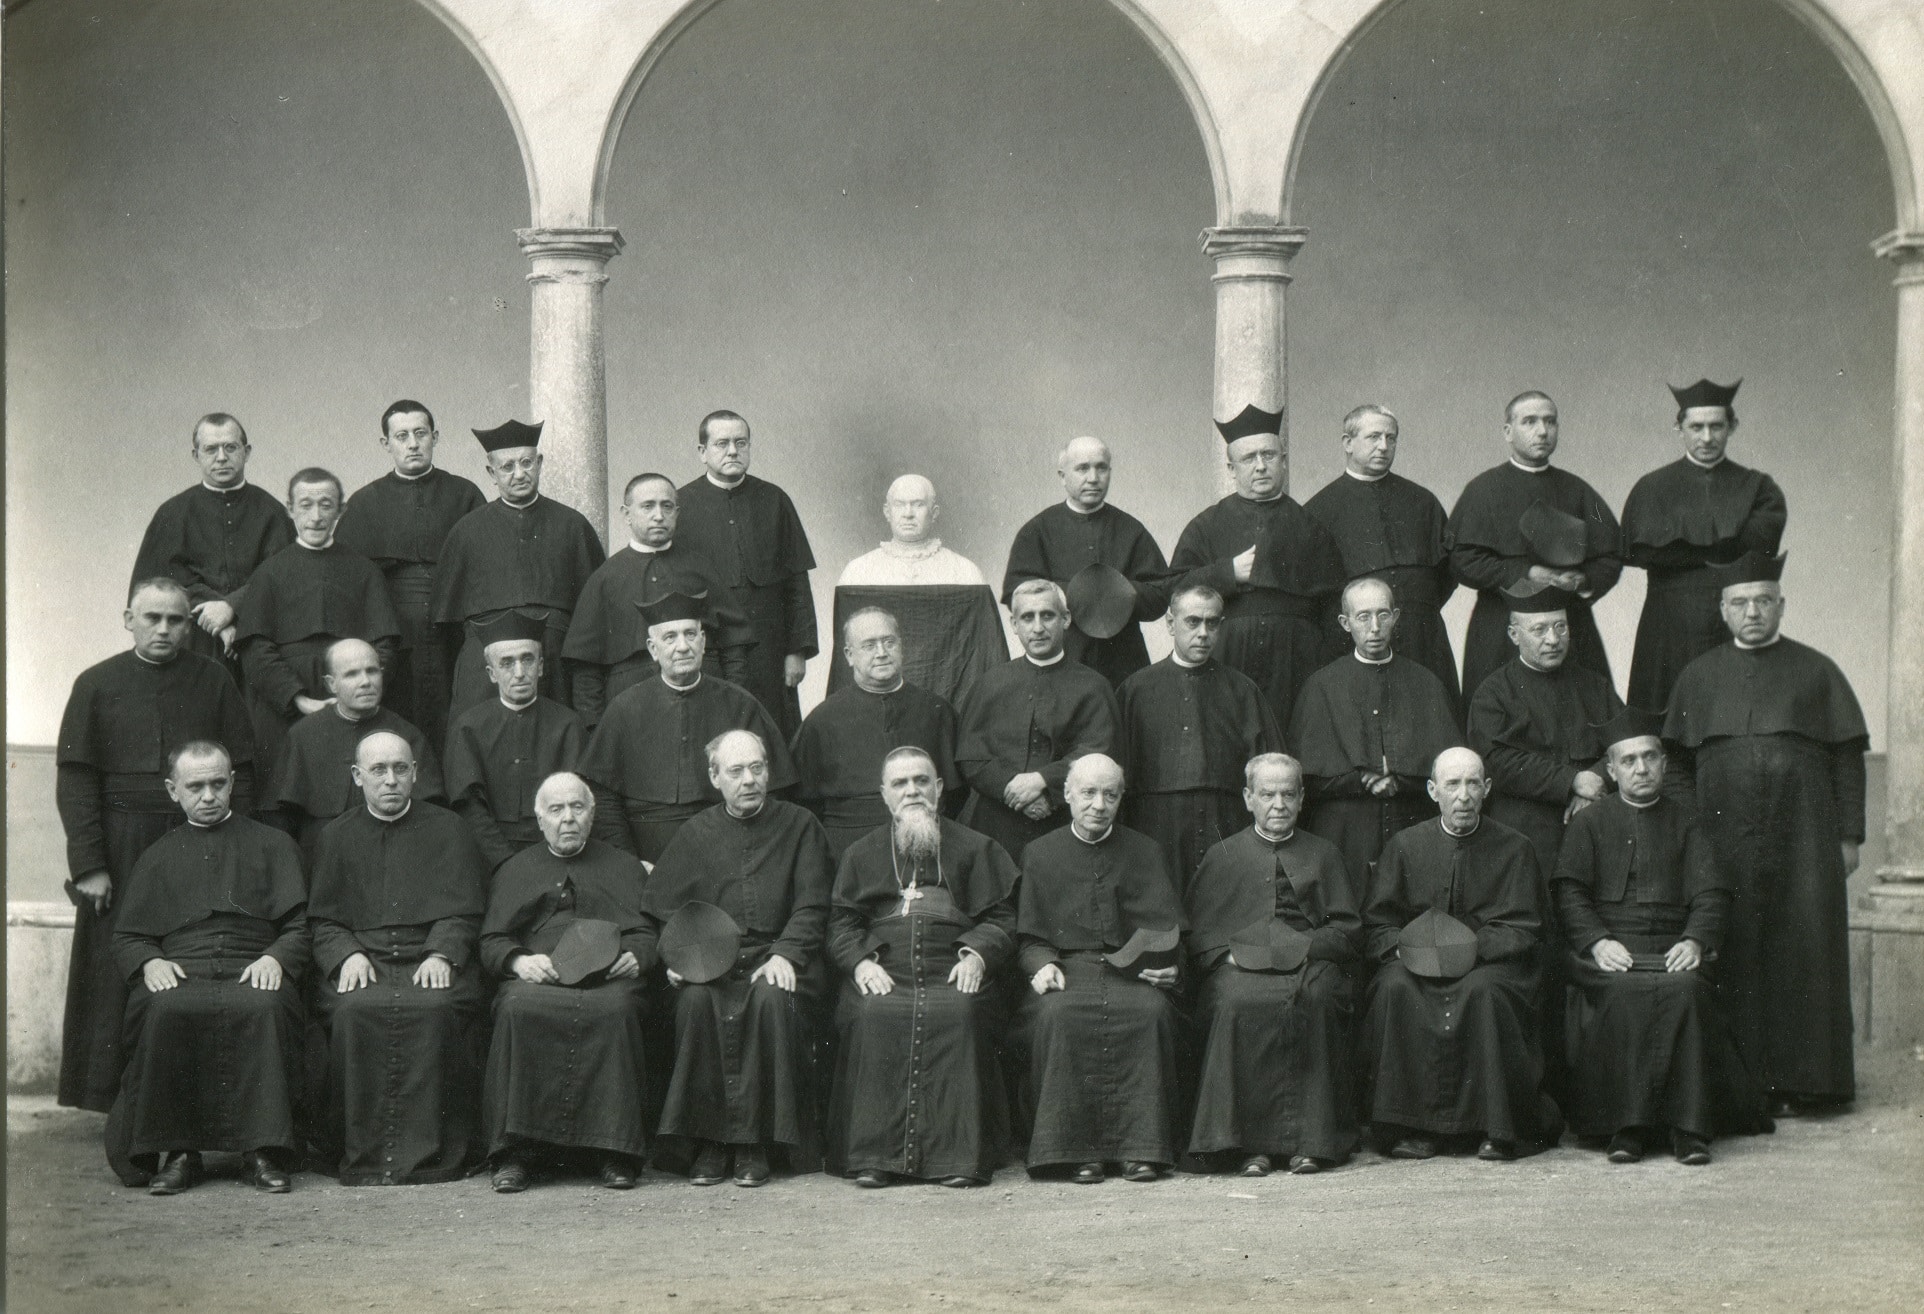 Story behind the transfer of the Headquarters of the General Government of the Claretian Missionaries to Rome 100 years ago